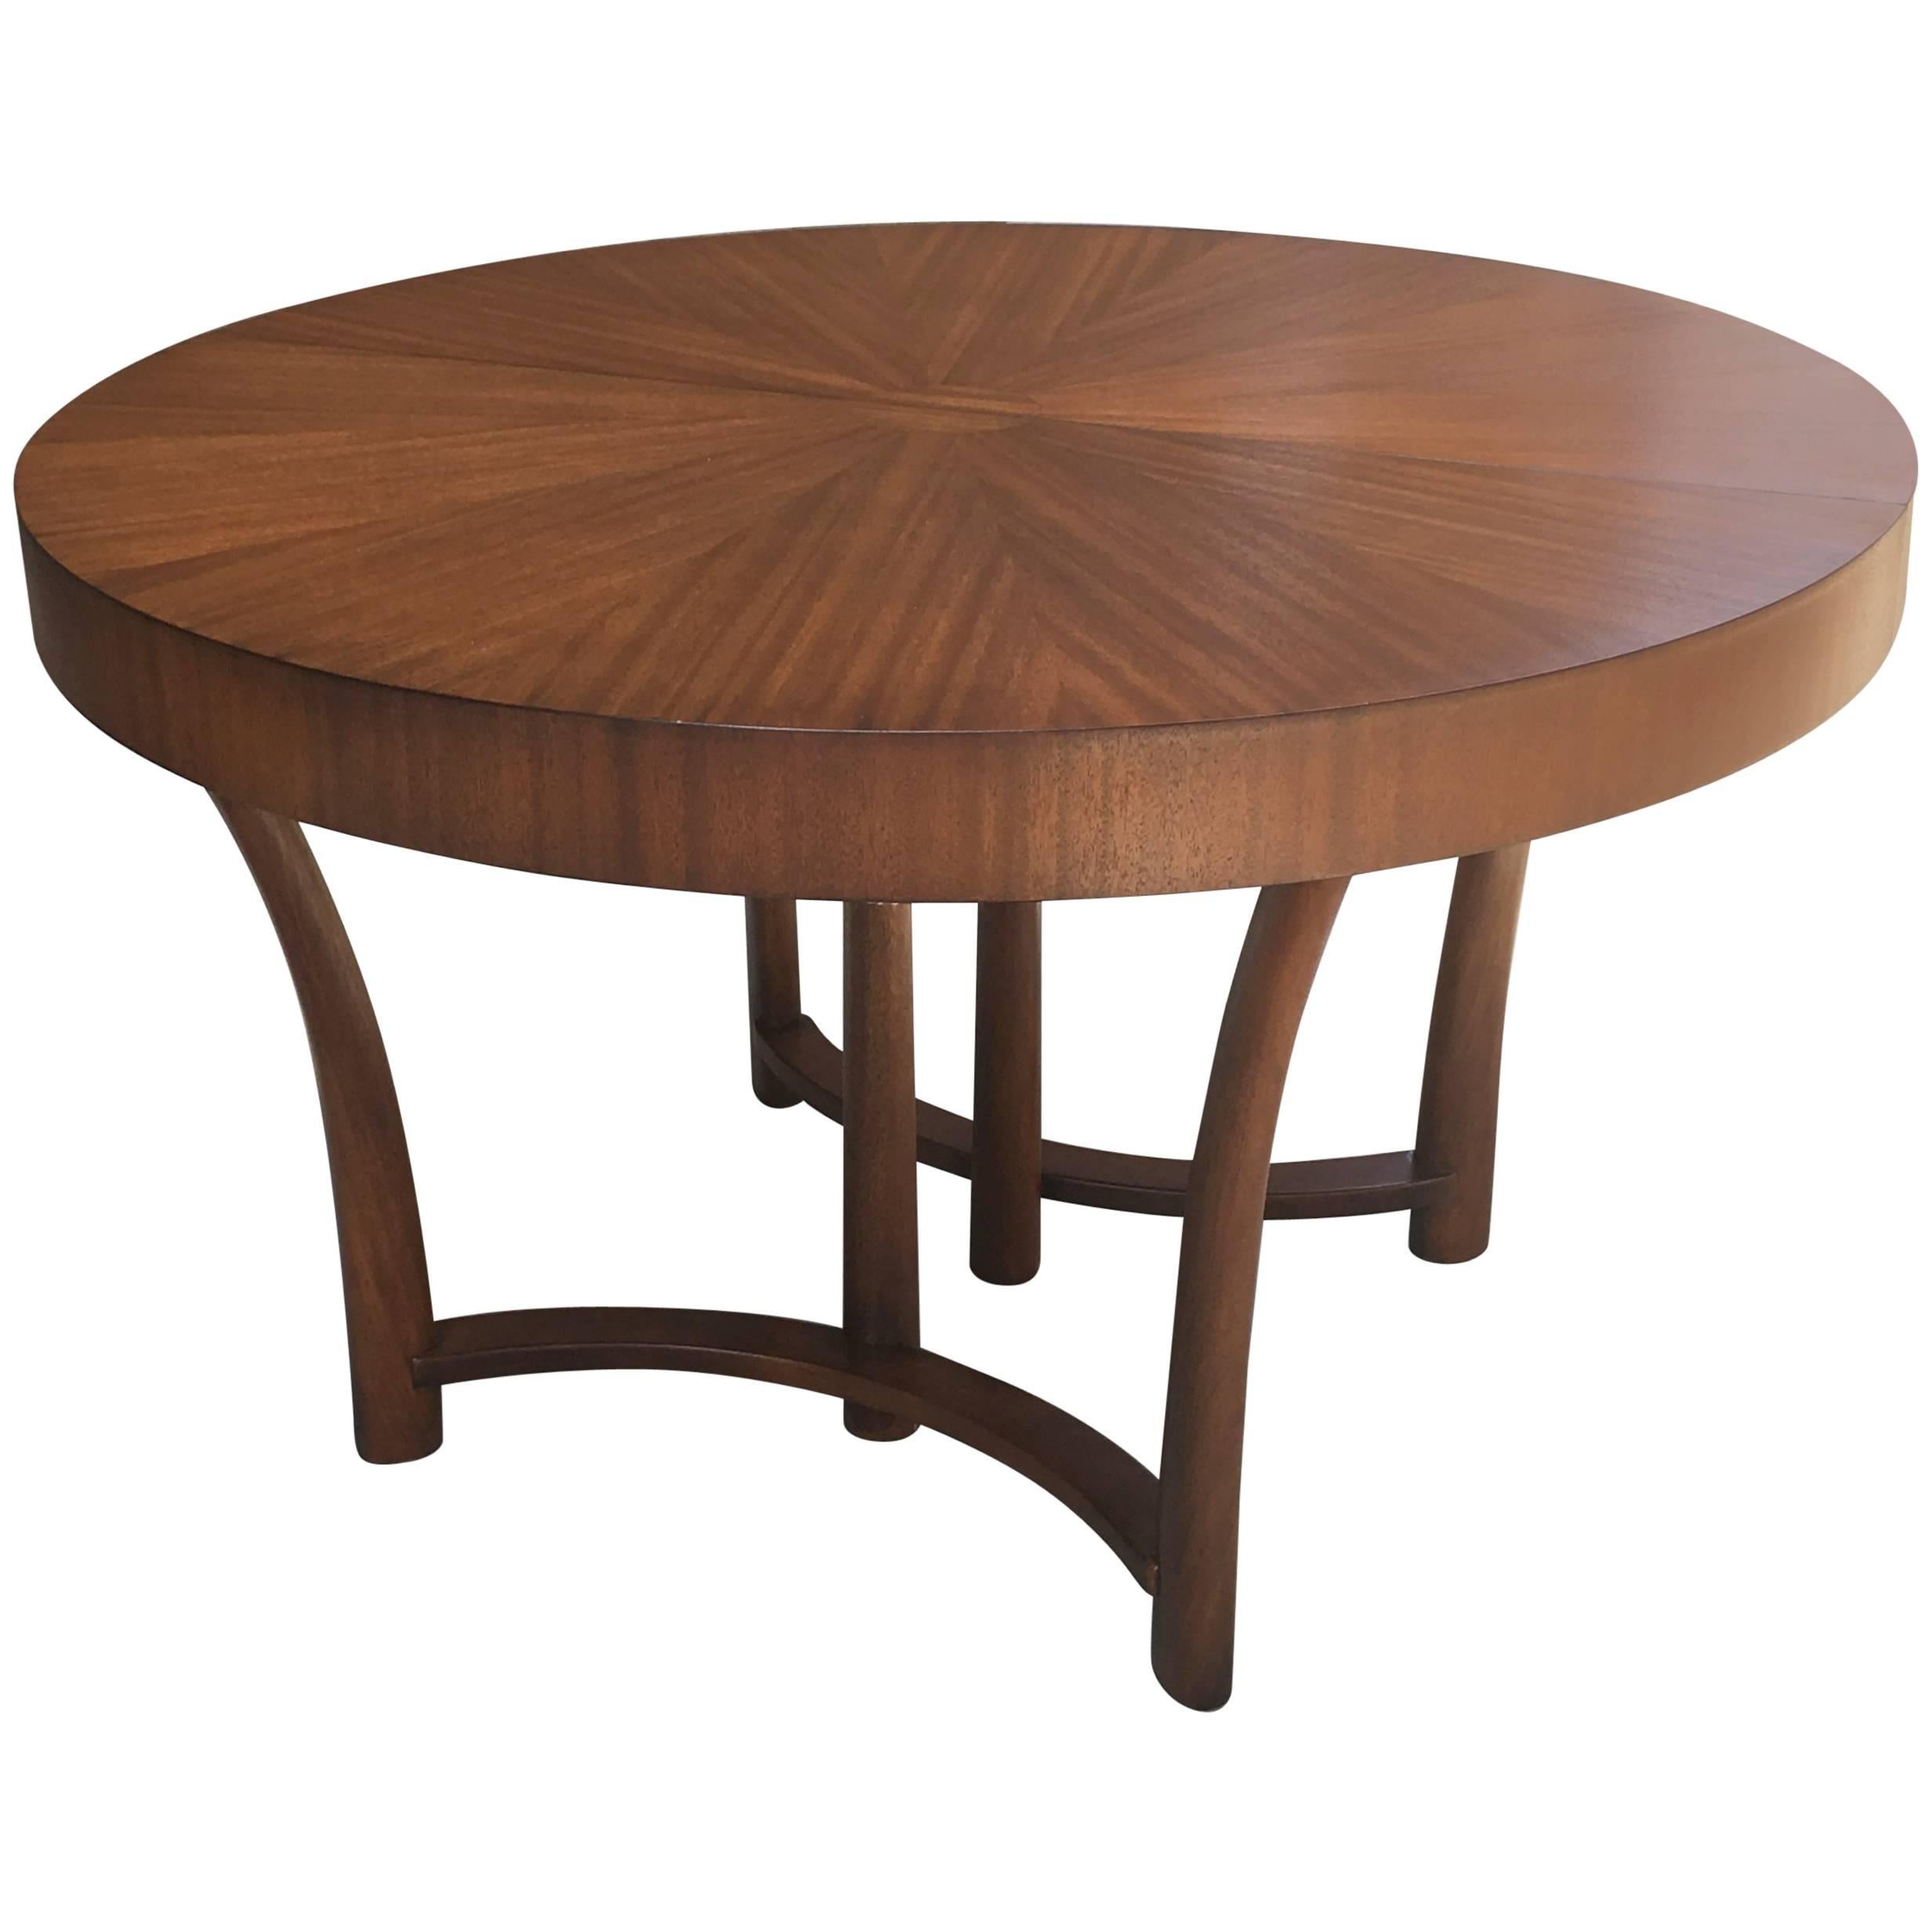 T.H. Robsjohn-Gibbings Style Dining Table By Widdicomb, circa 1938 For Sale